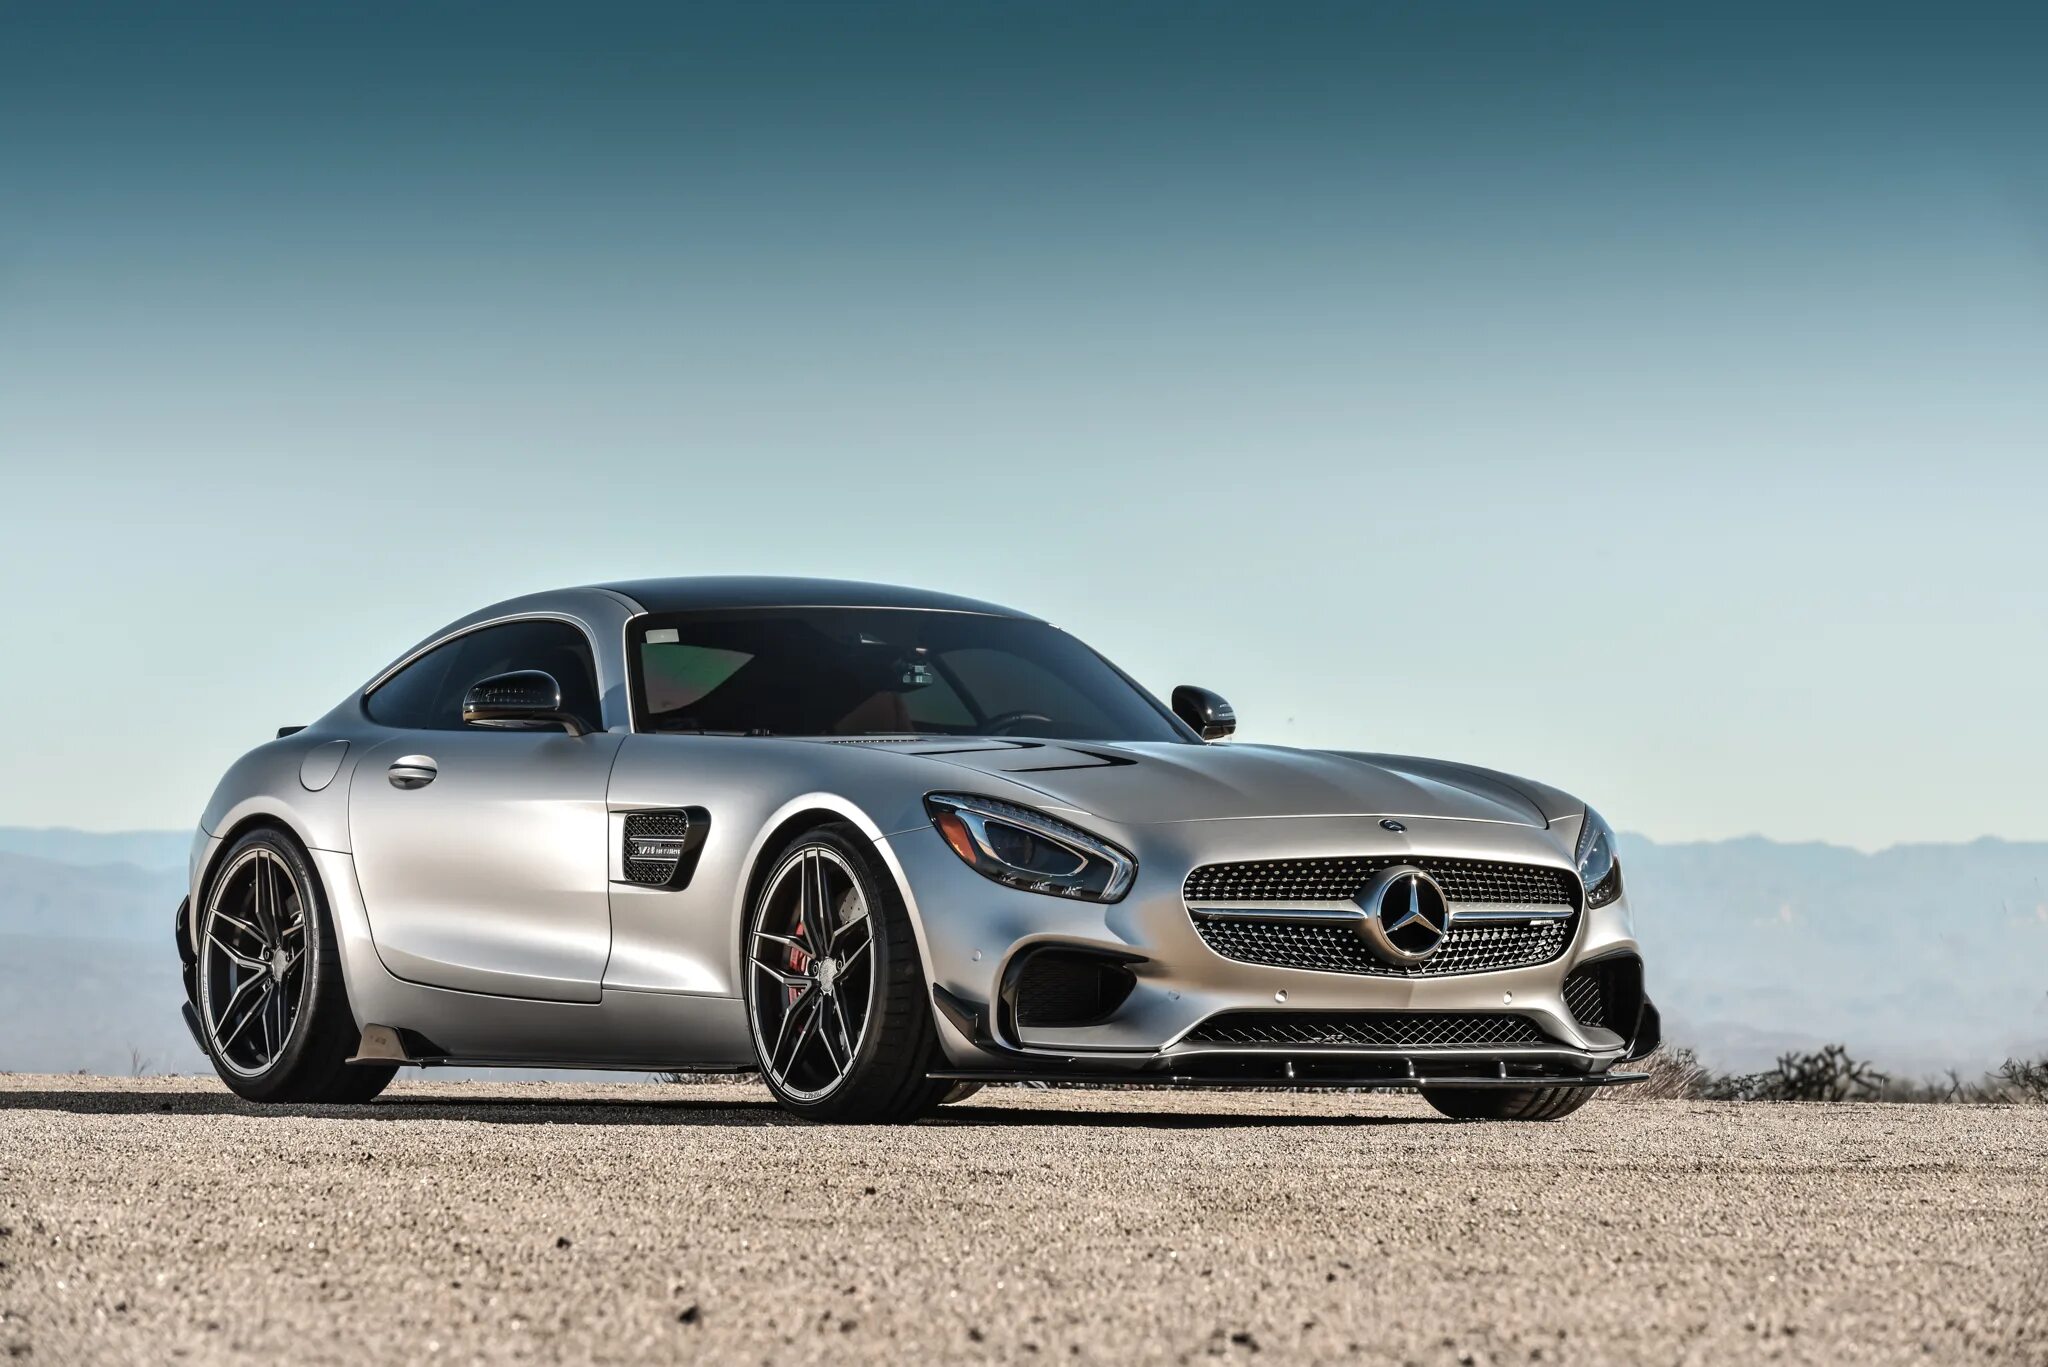 Mercedes AMG GTS 2017. Мерседес АМГ gt s 2017. Mercedes GTS 2019. Mercedes AMG. GTS. V8. 2019..